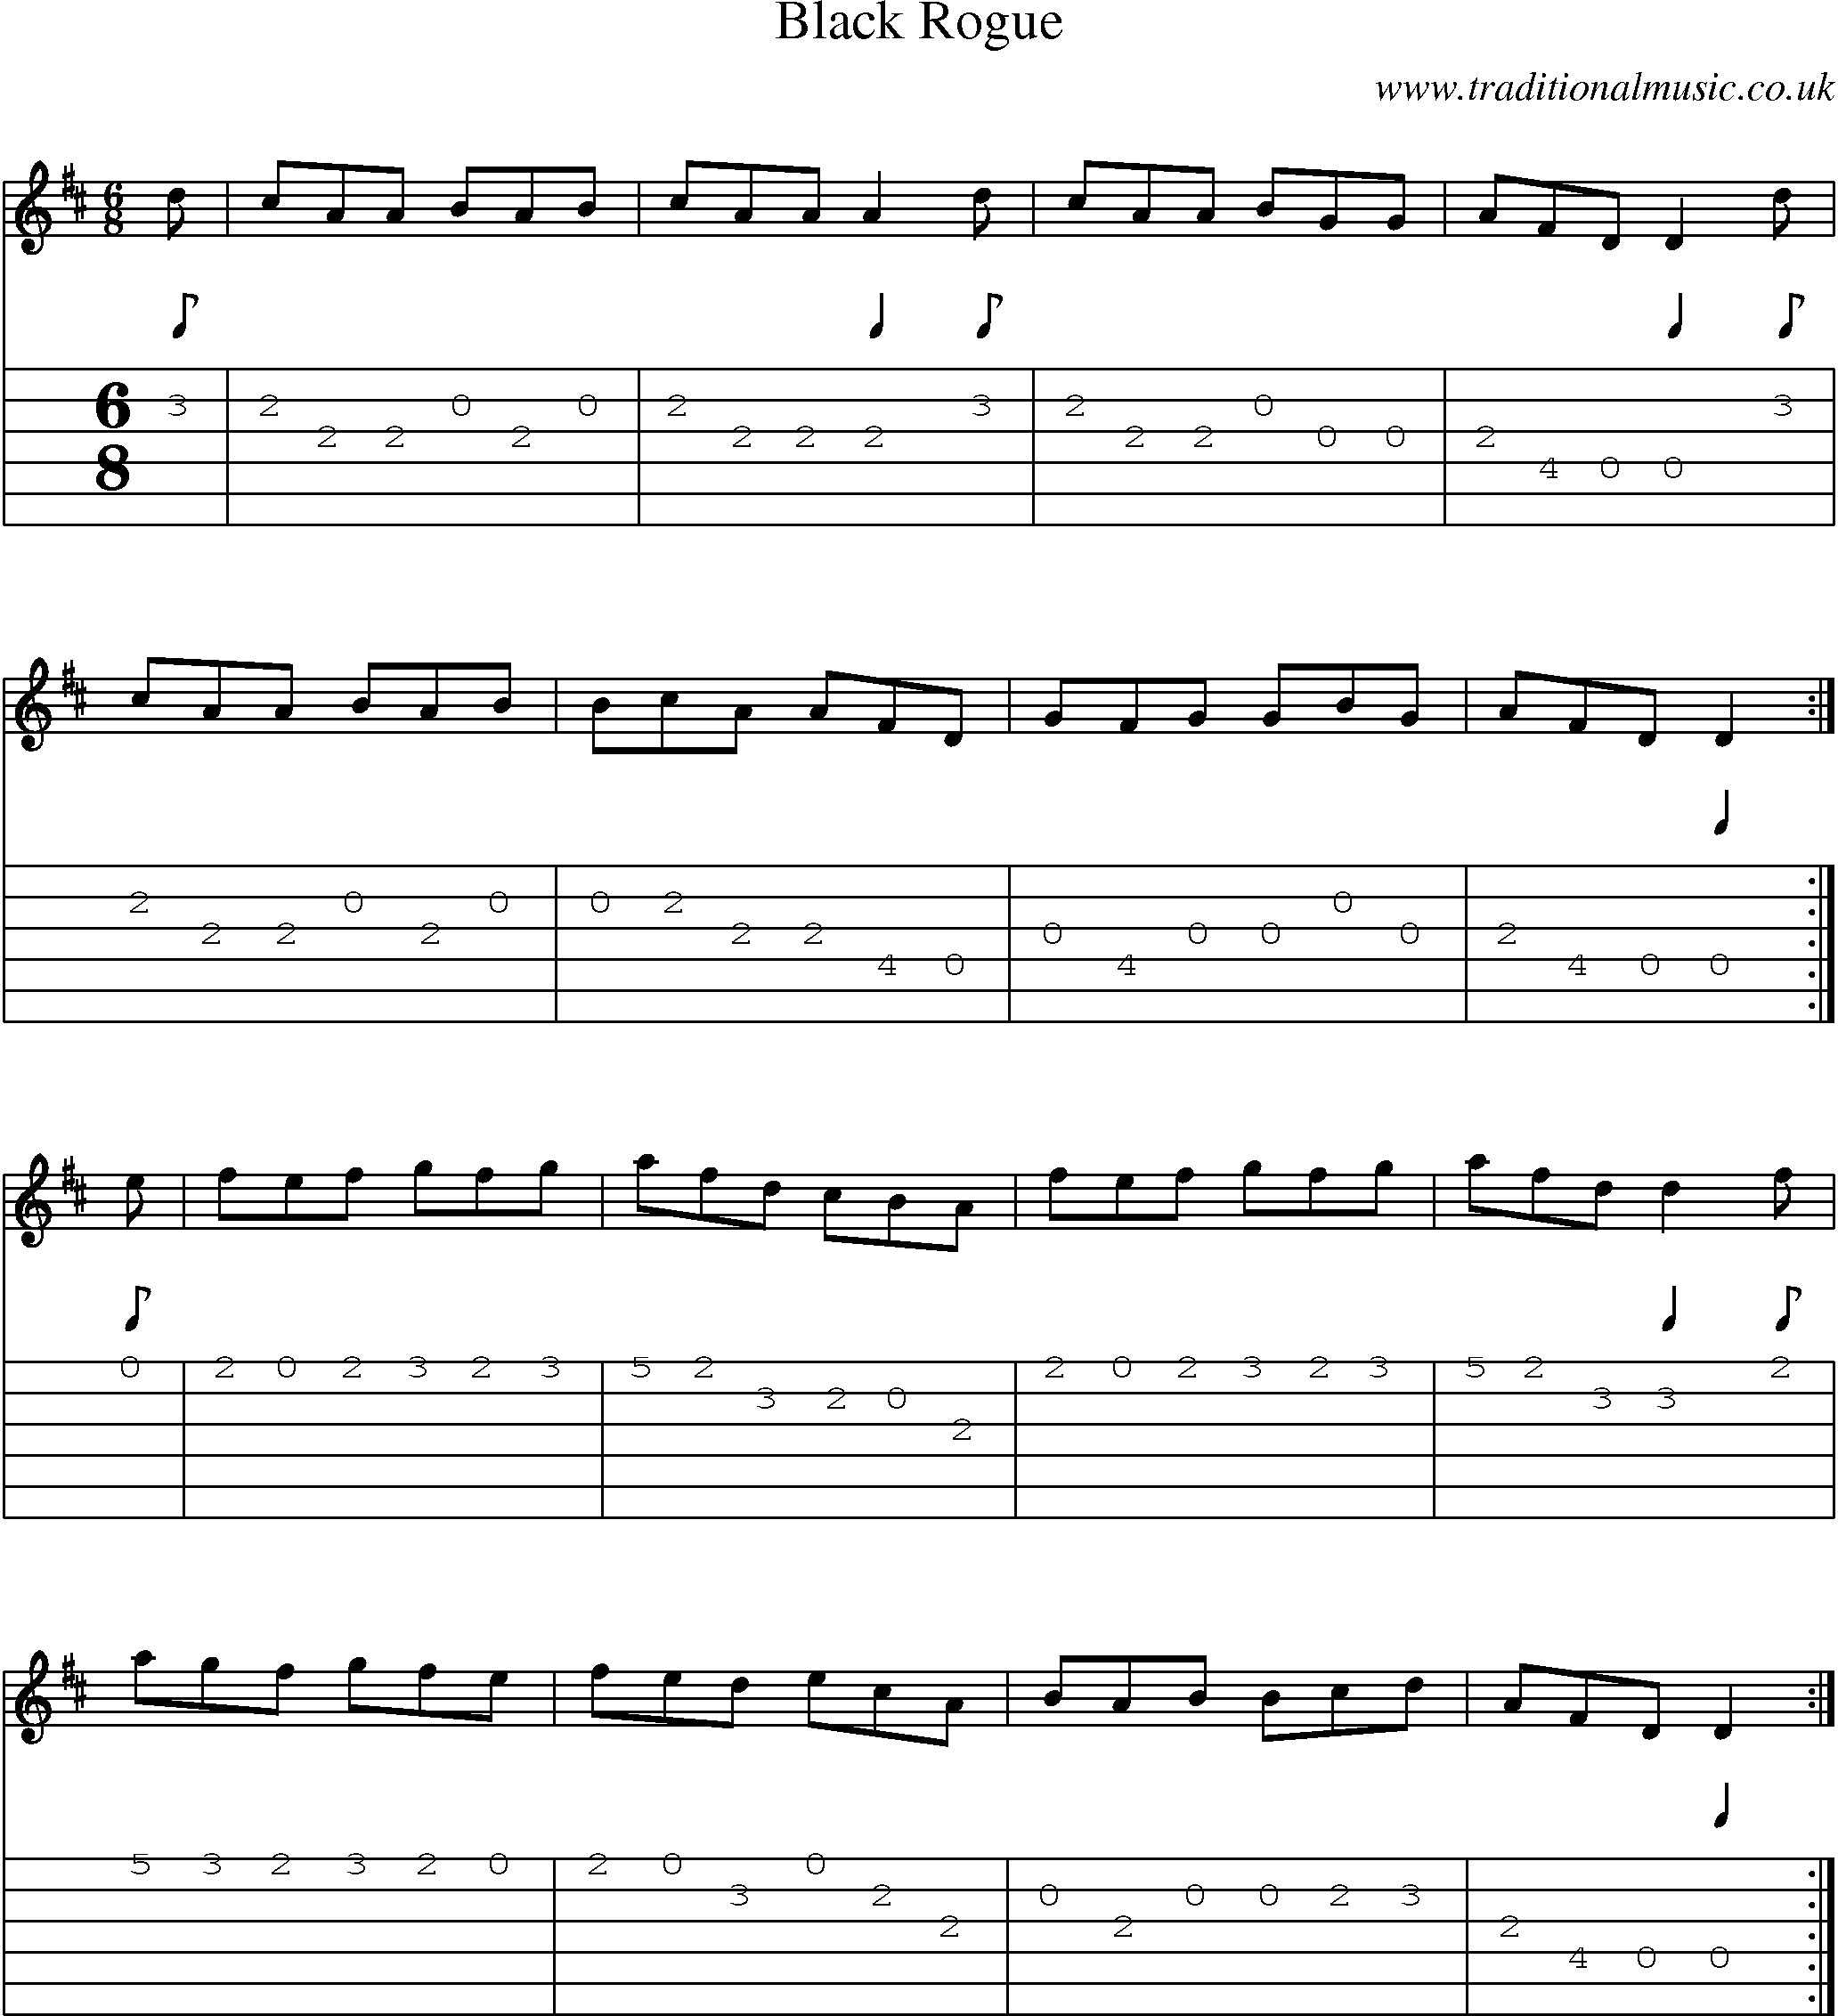 Music Score and Guitar Tabs for Black Rogue